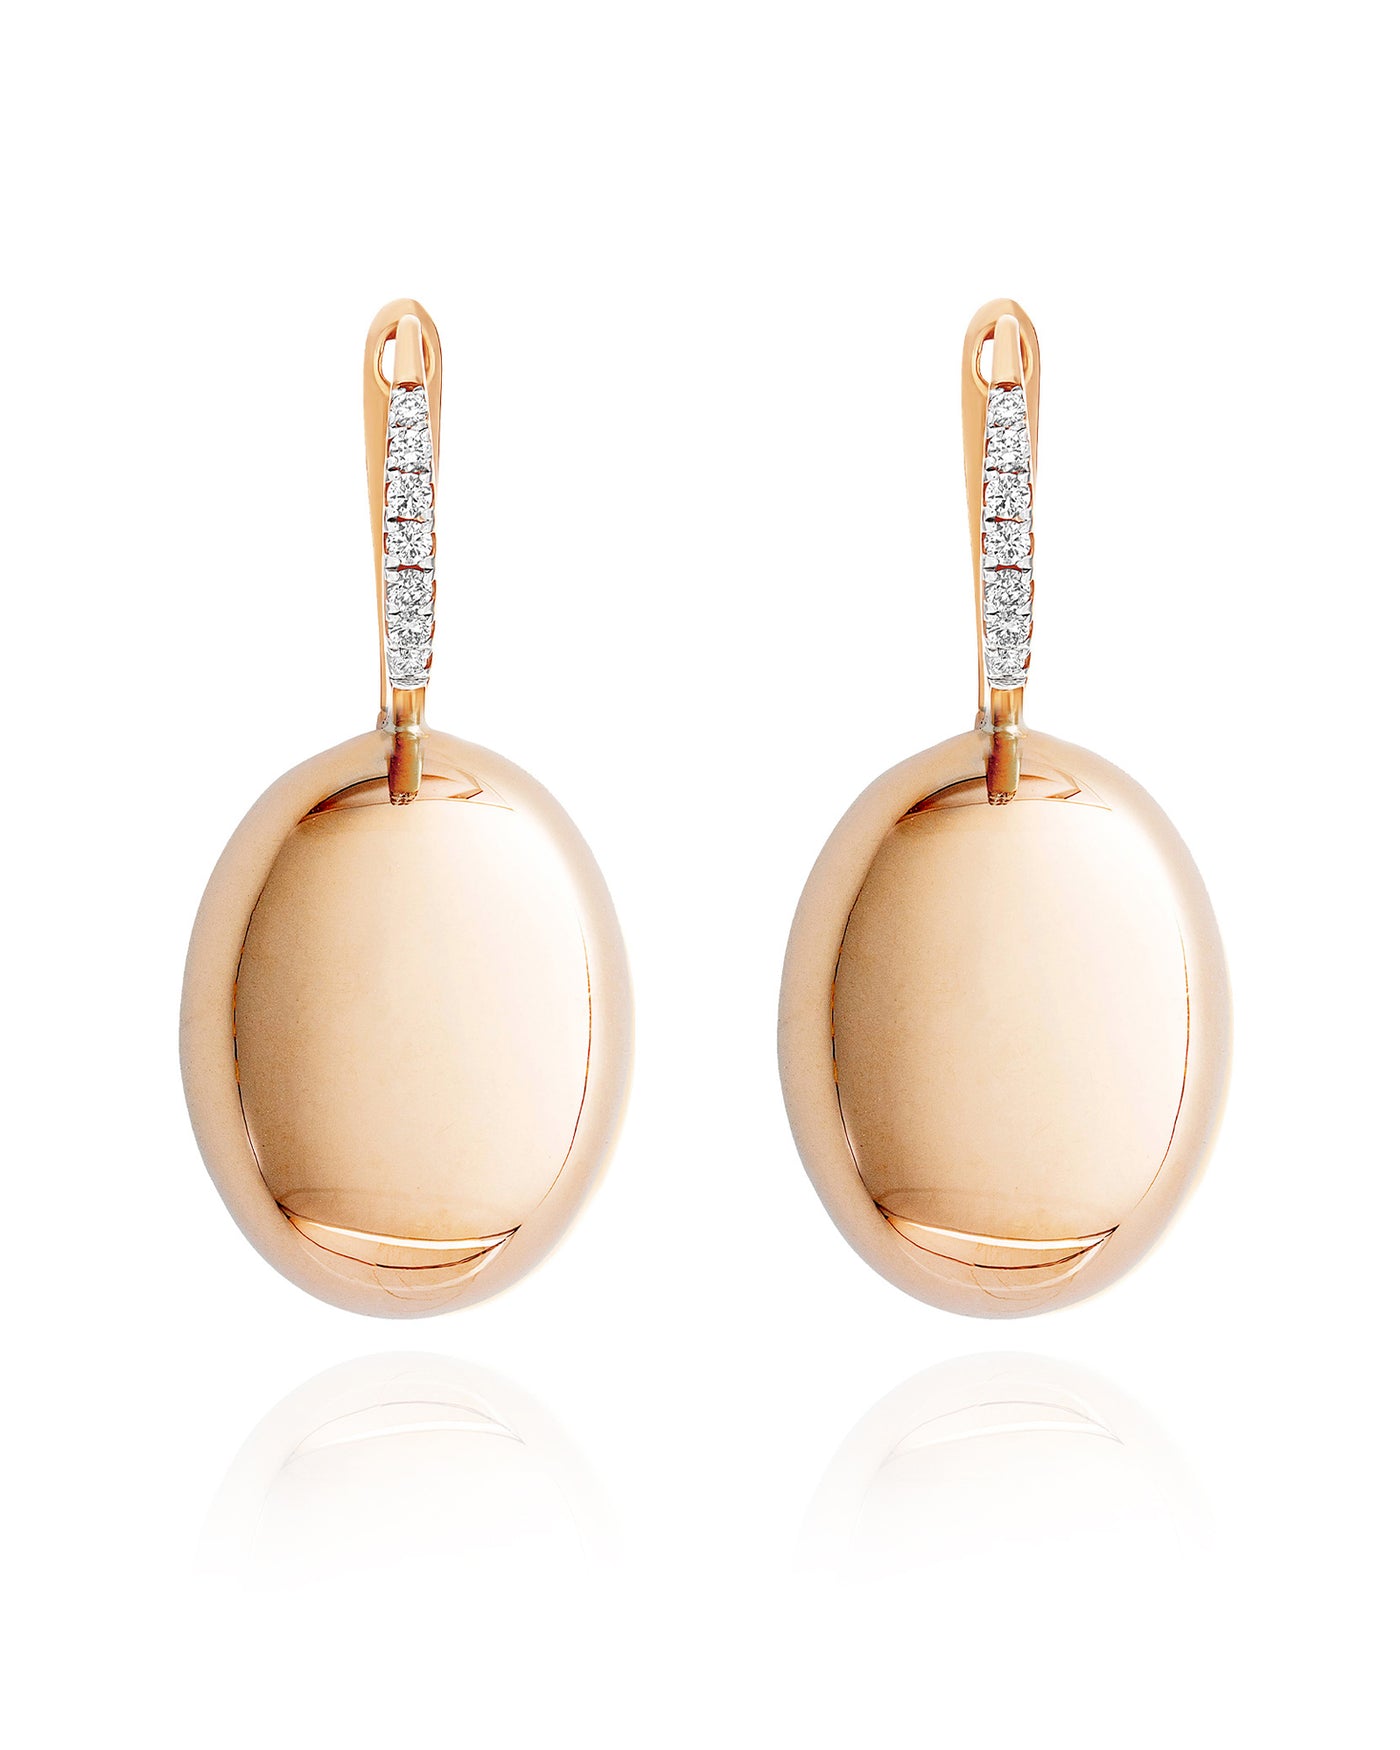 "ciliegine" rose gold boules and diamonds details earrings (large)